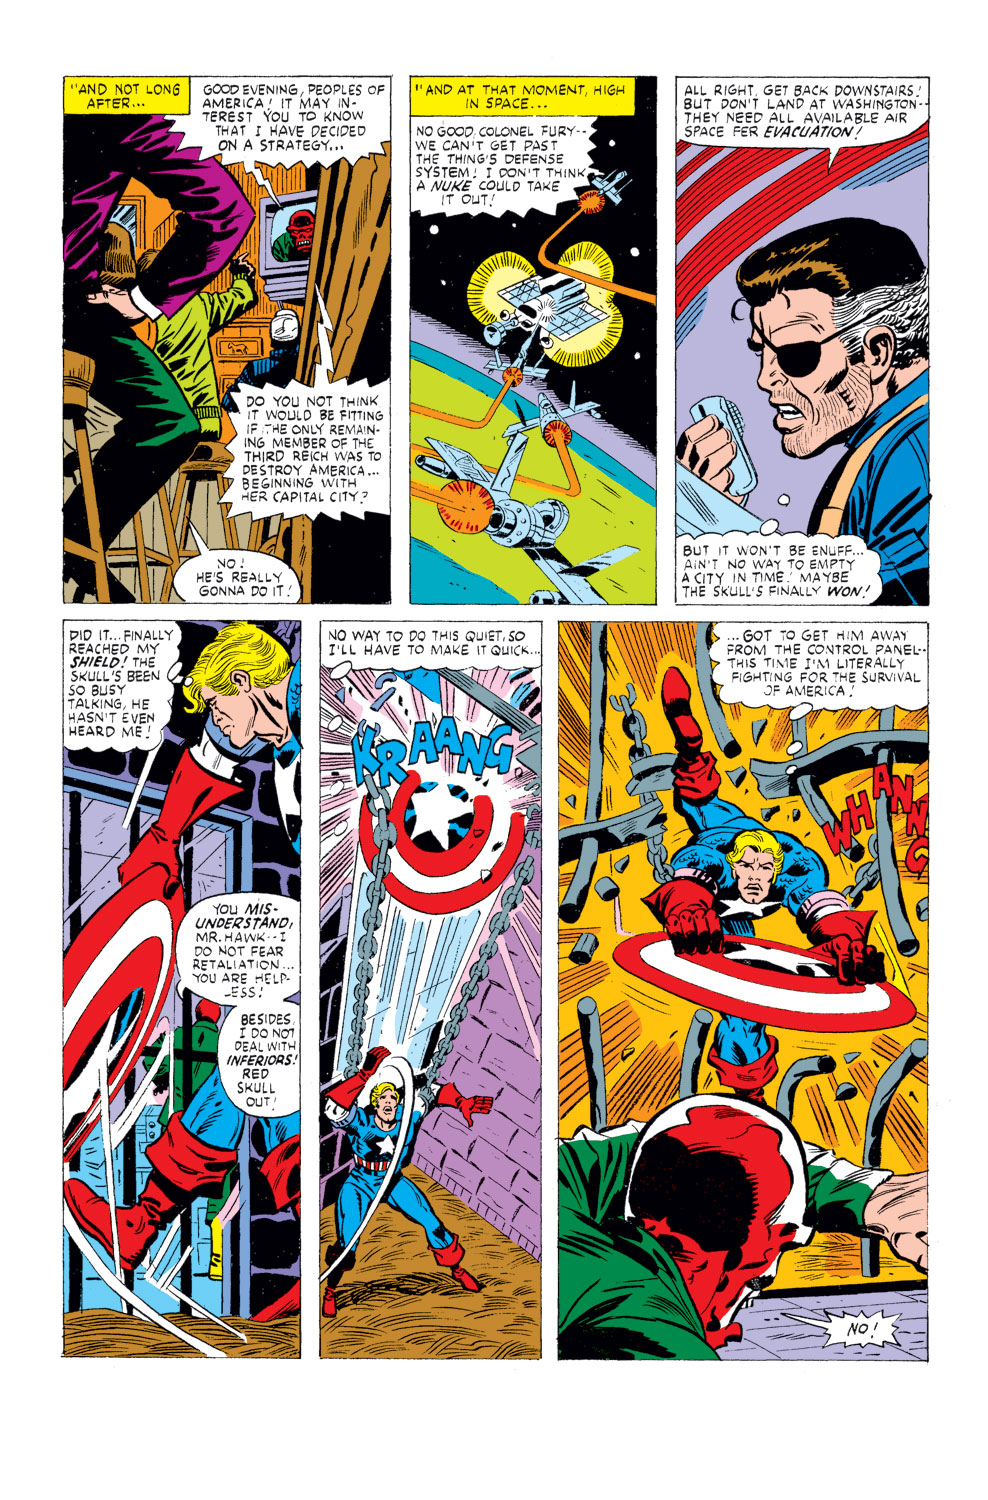 What If? (1977) issue 26 - Captain America had been elected president - Page 18